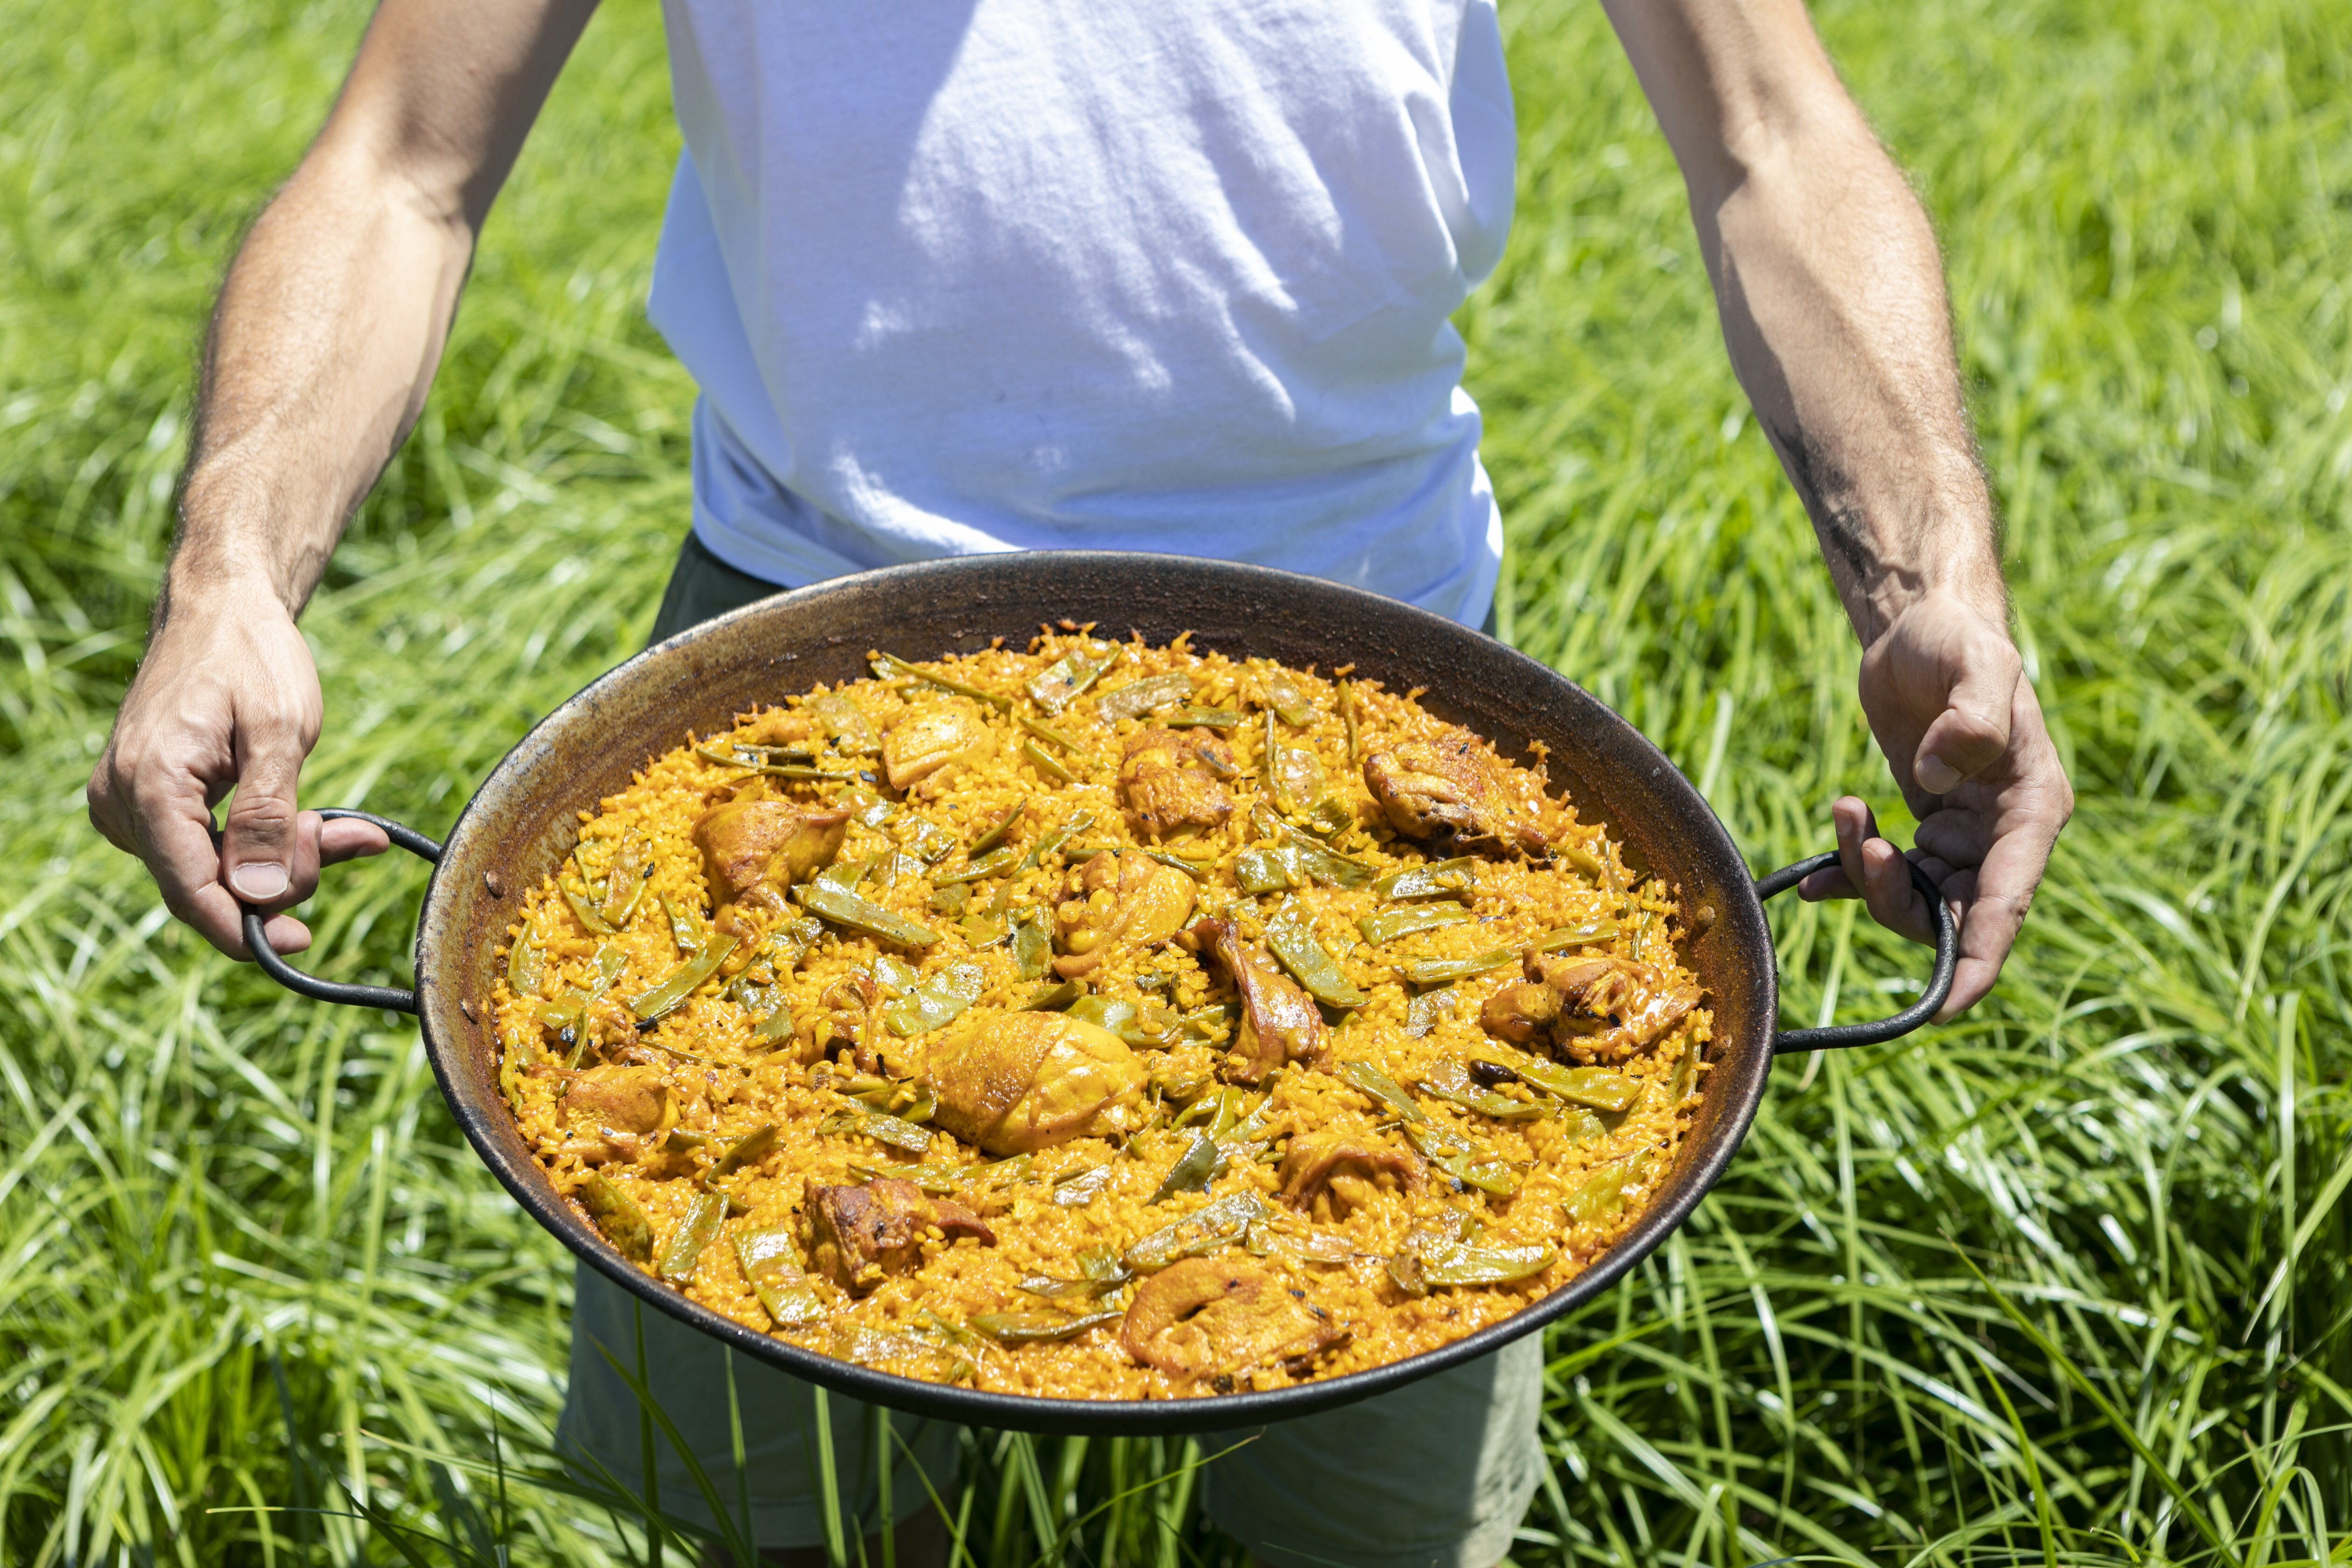 Traditional Valenciana paella. The dish flourished in Spain’s Valencia region where the conditions are ideal to grow rice. But the origins of paella date back centuries in Spain to the arrival of the Moors from North Africa. Photo: Visit Valencia